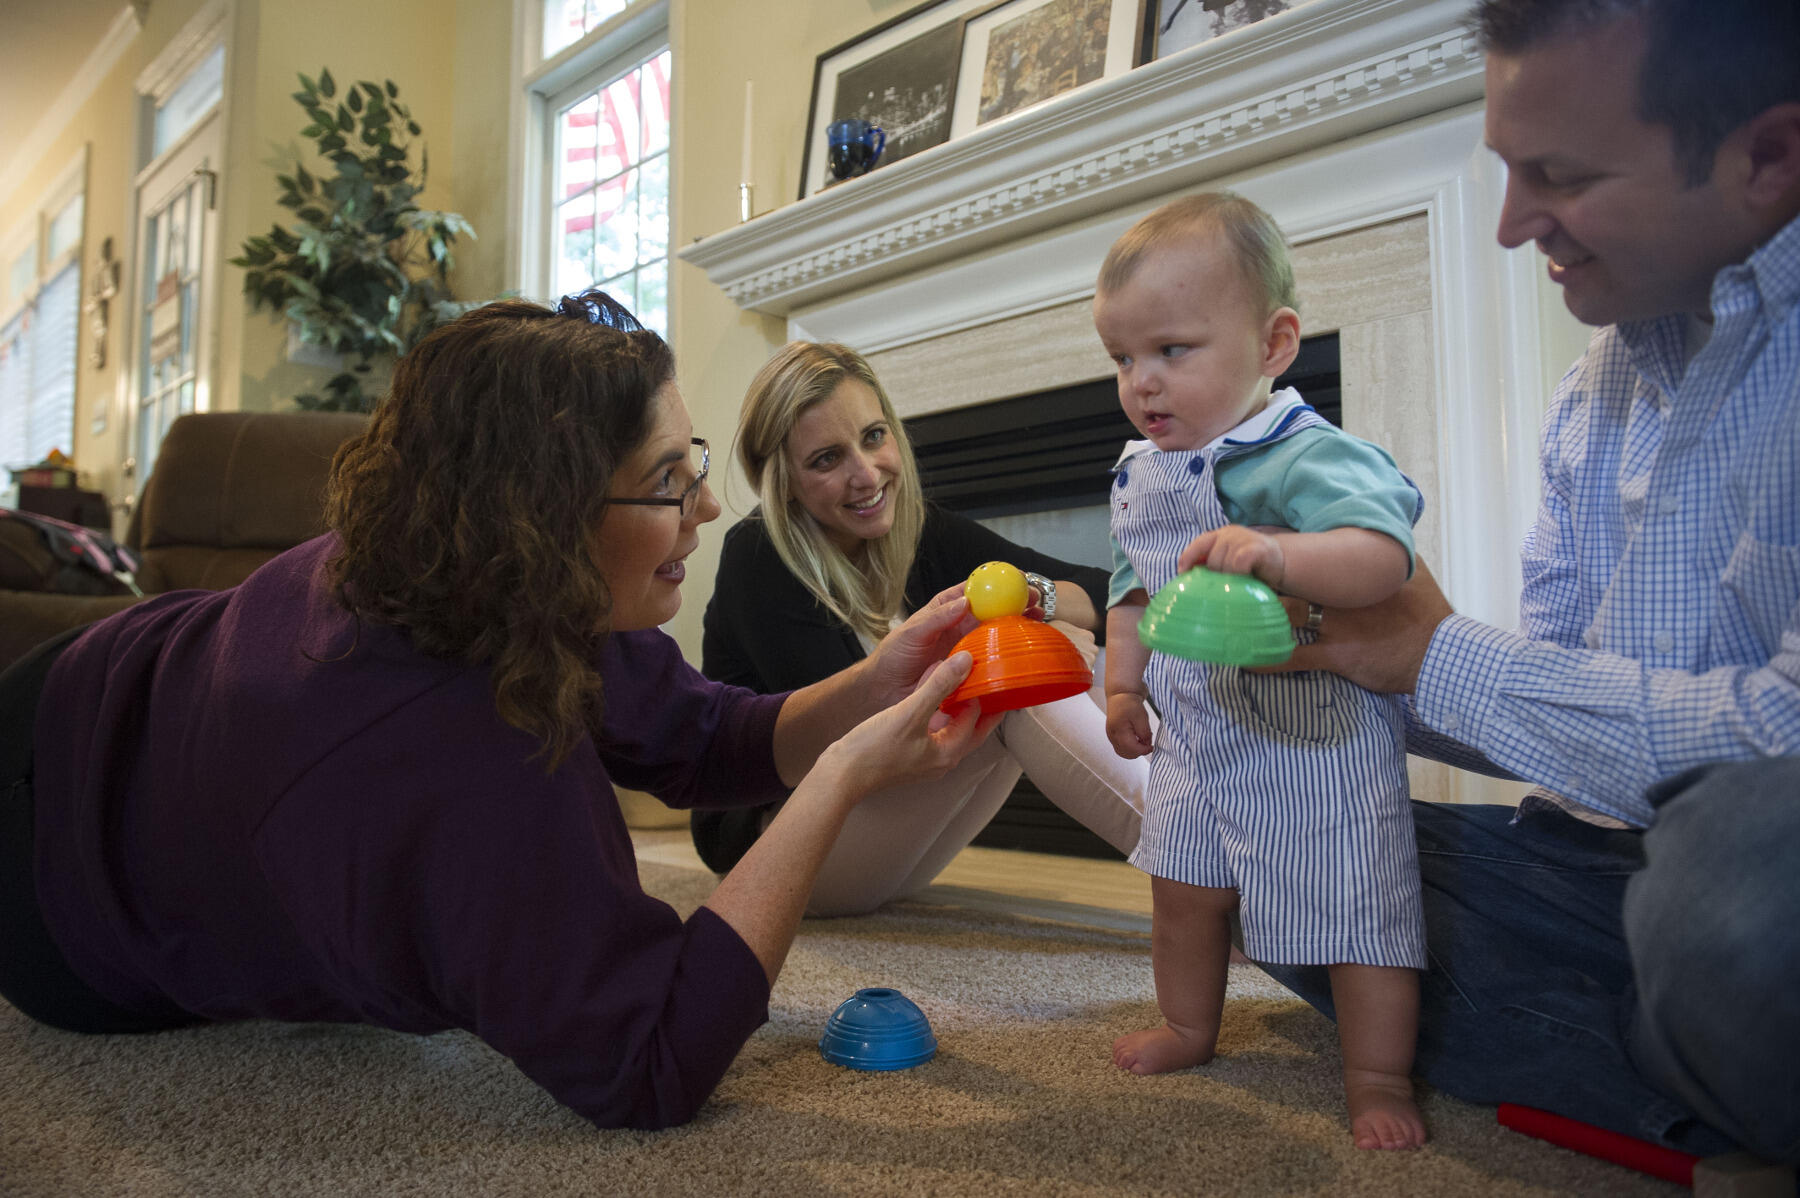 Stacey Dusing, Ph.D., associate professor in the Department of Physical Therapy, works with Miles Mrozinski at home with his parents, Whitney and Brent Mrozinski. Miles has been part of the START-Play Program since April.